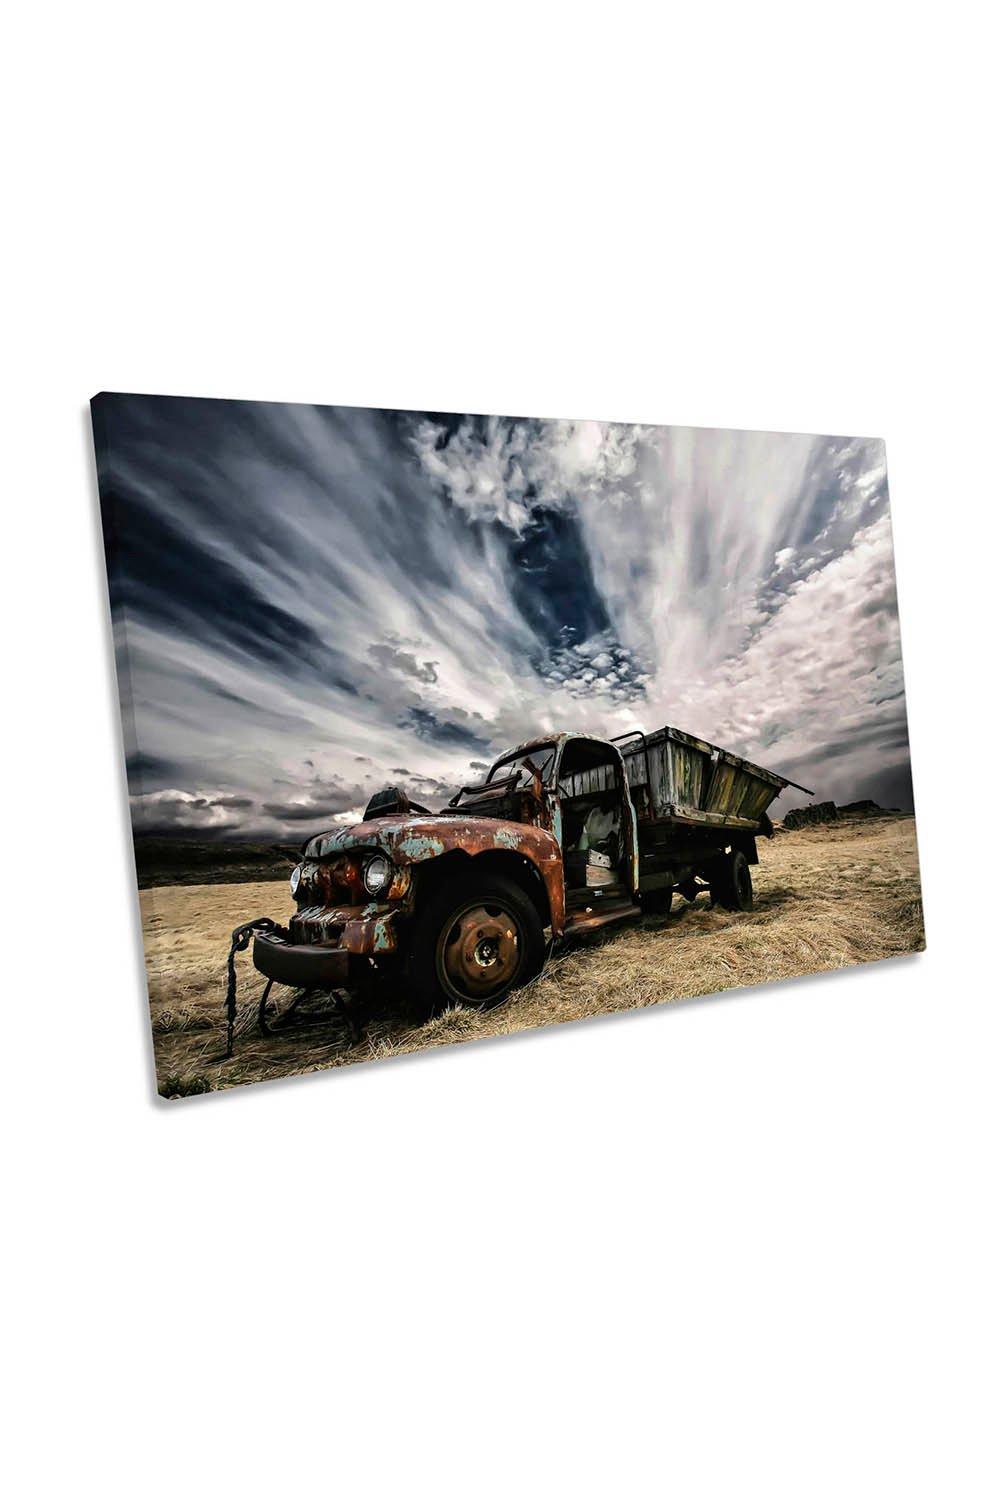 Rusty Old Abandoned Truck Canvas Wall Art Picture Print